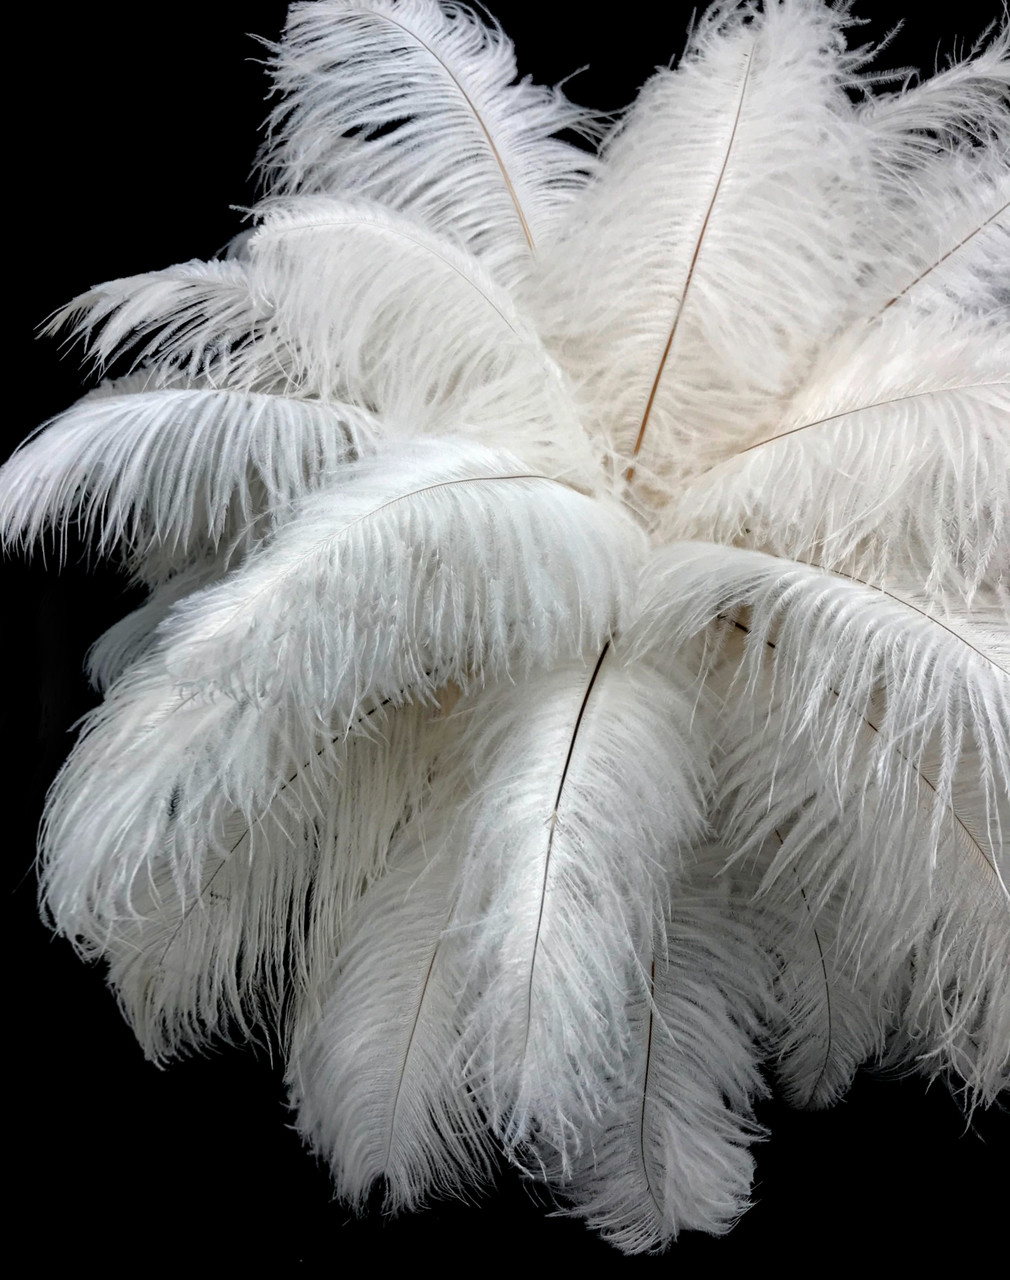 Tiptop Decoration Natural Ostrich Feather (White; 23-25 Inch) (1 Piece) -  Natural Ostrich Feather (White; 23-25 Inch) (1 Piece) . shop for Tiptop  Decoration products in India.